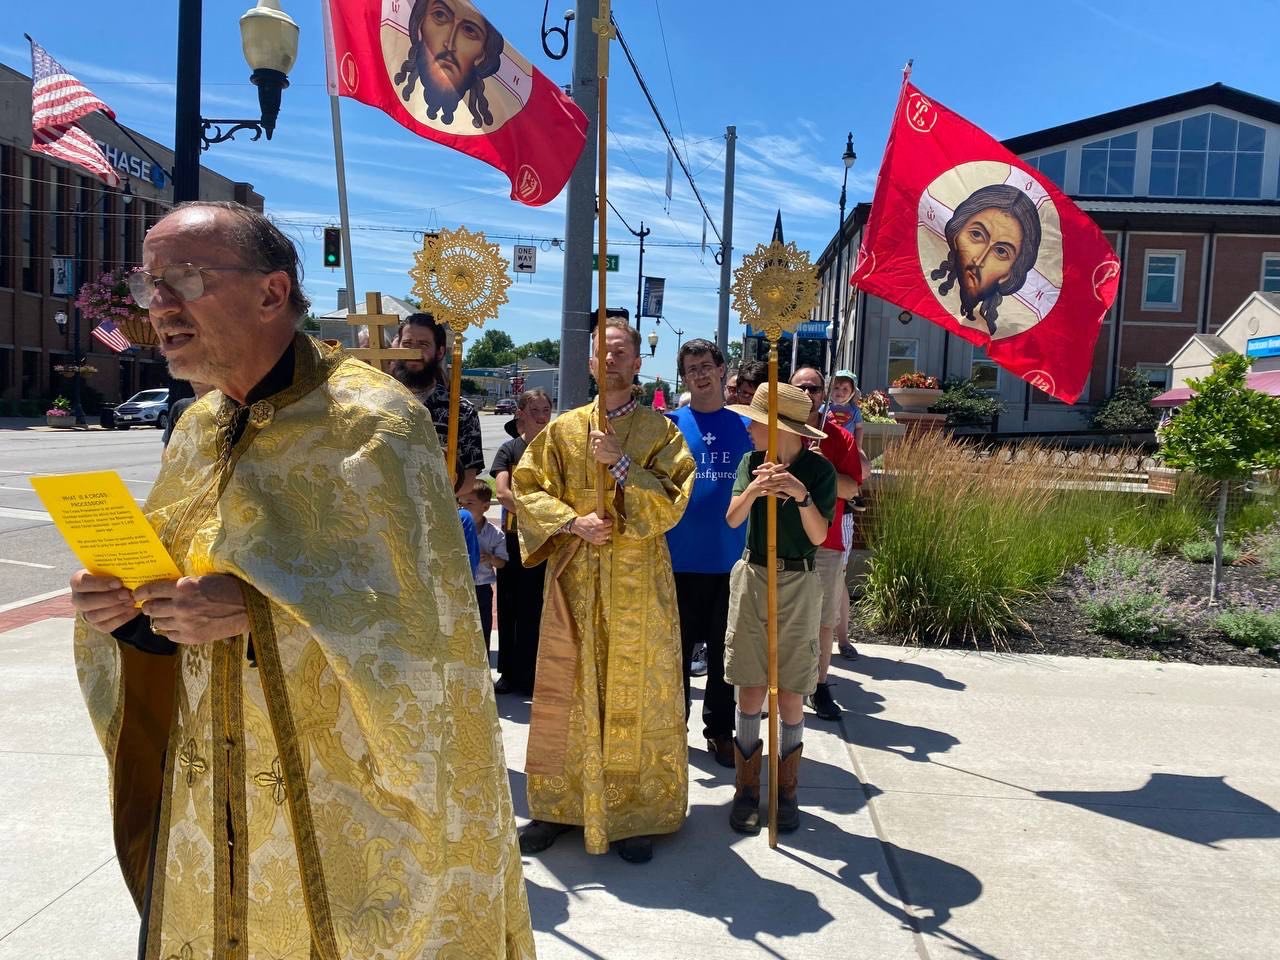 All area Christians are invited to participate in a cross procession in downtown Crawfordsville at 12:30 p.m. Wednesday. The procession will begin in the parking lot of the Crawfordsville District Public Library.